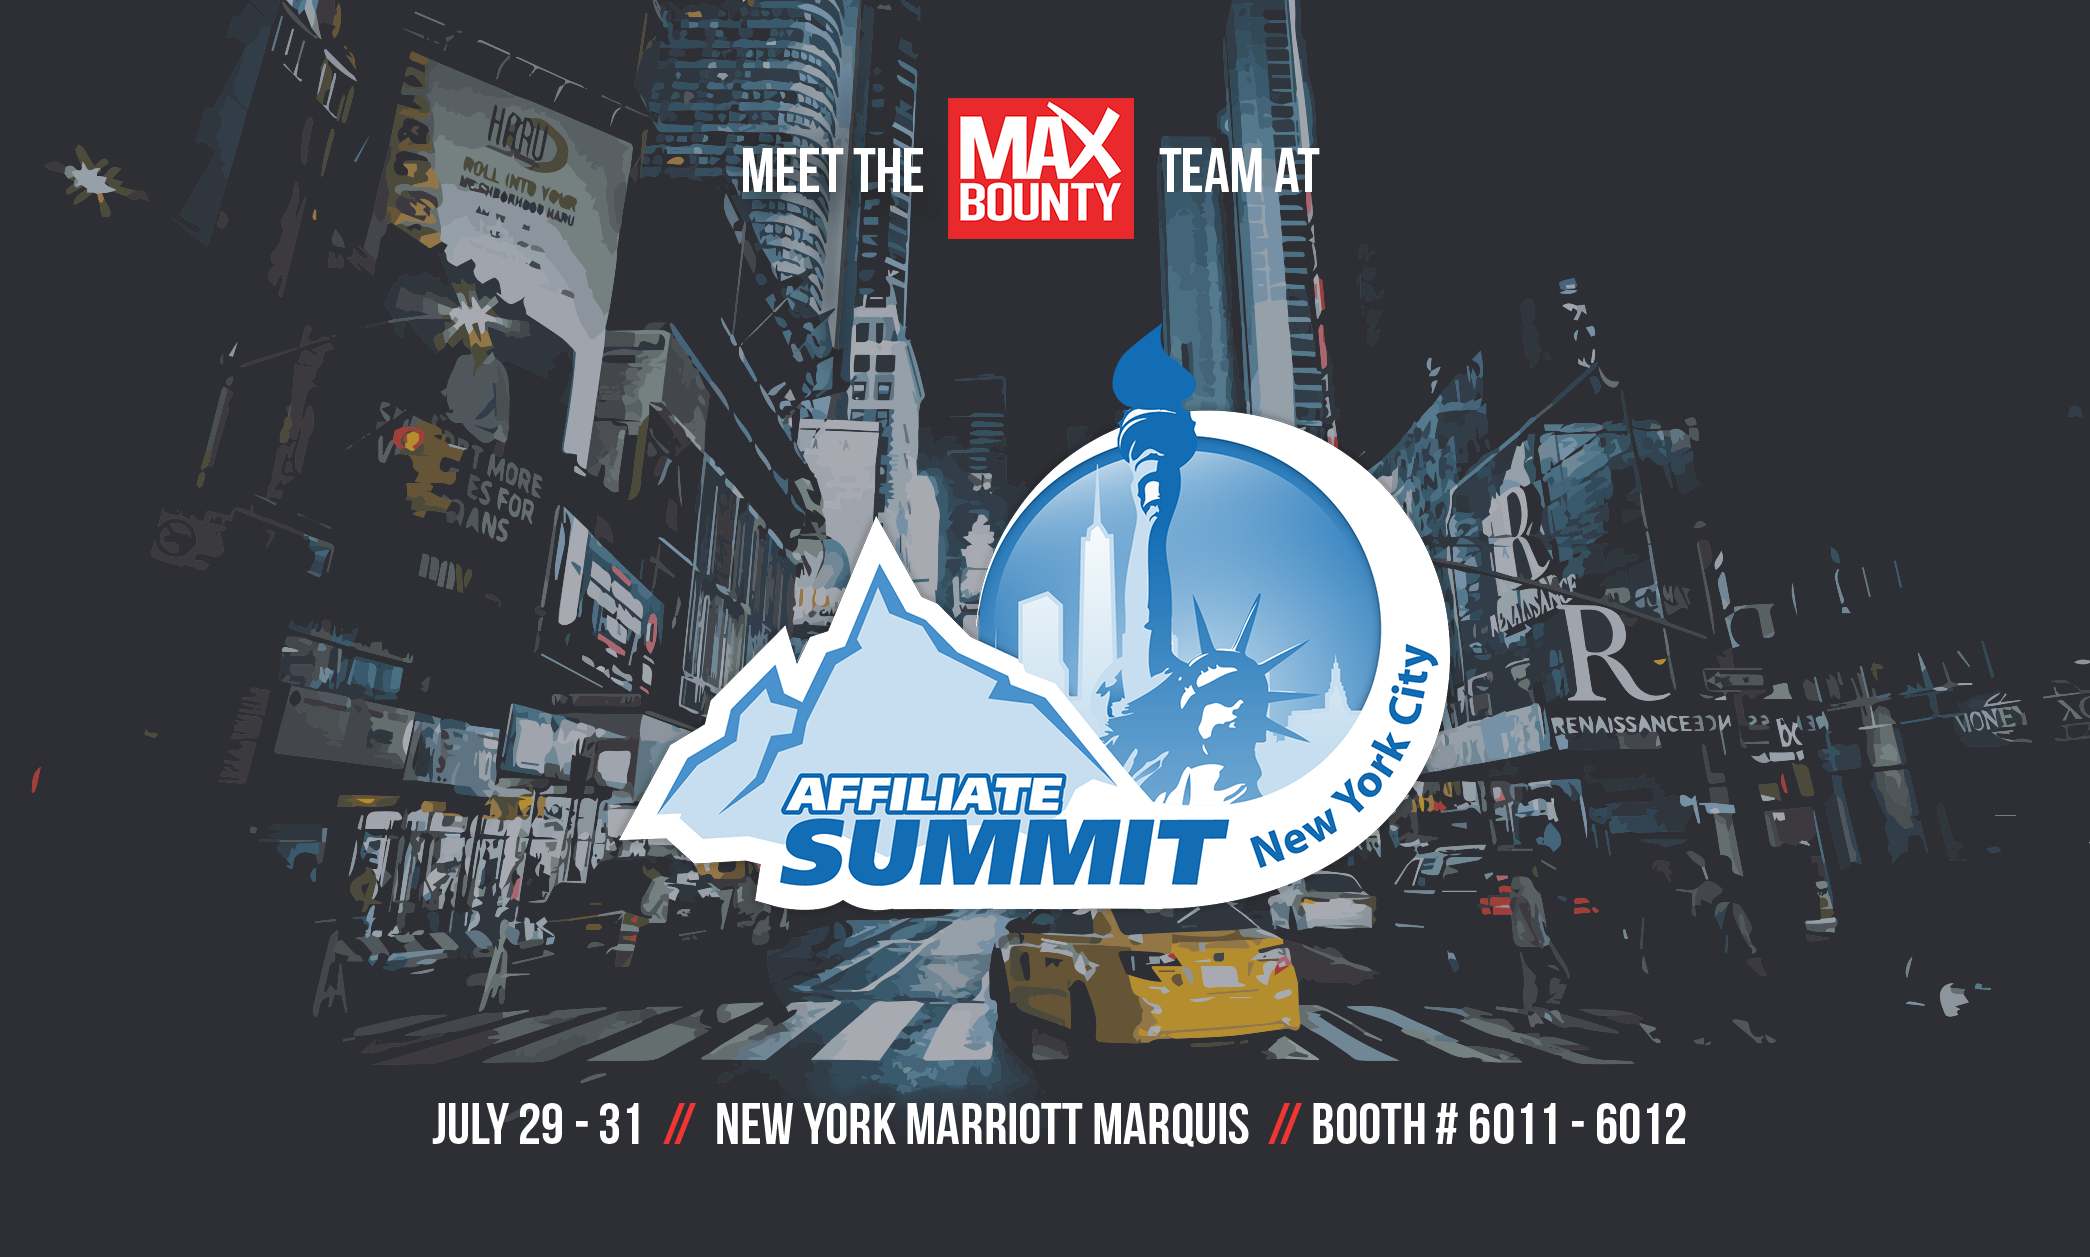 Meet with MaxBounty (and Drink Free Beer) at Affiliate Summit